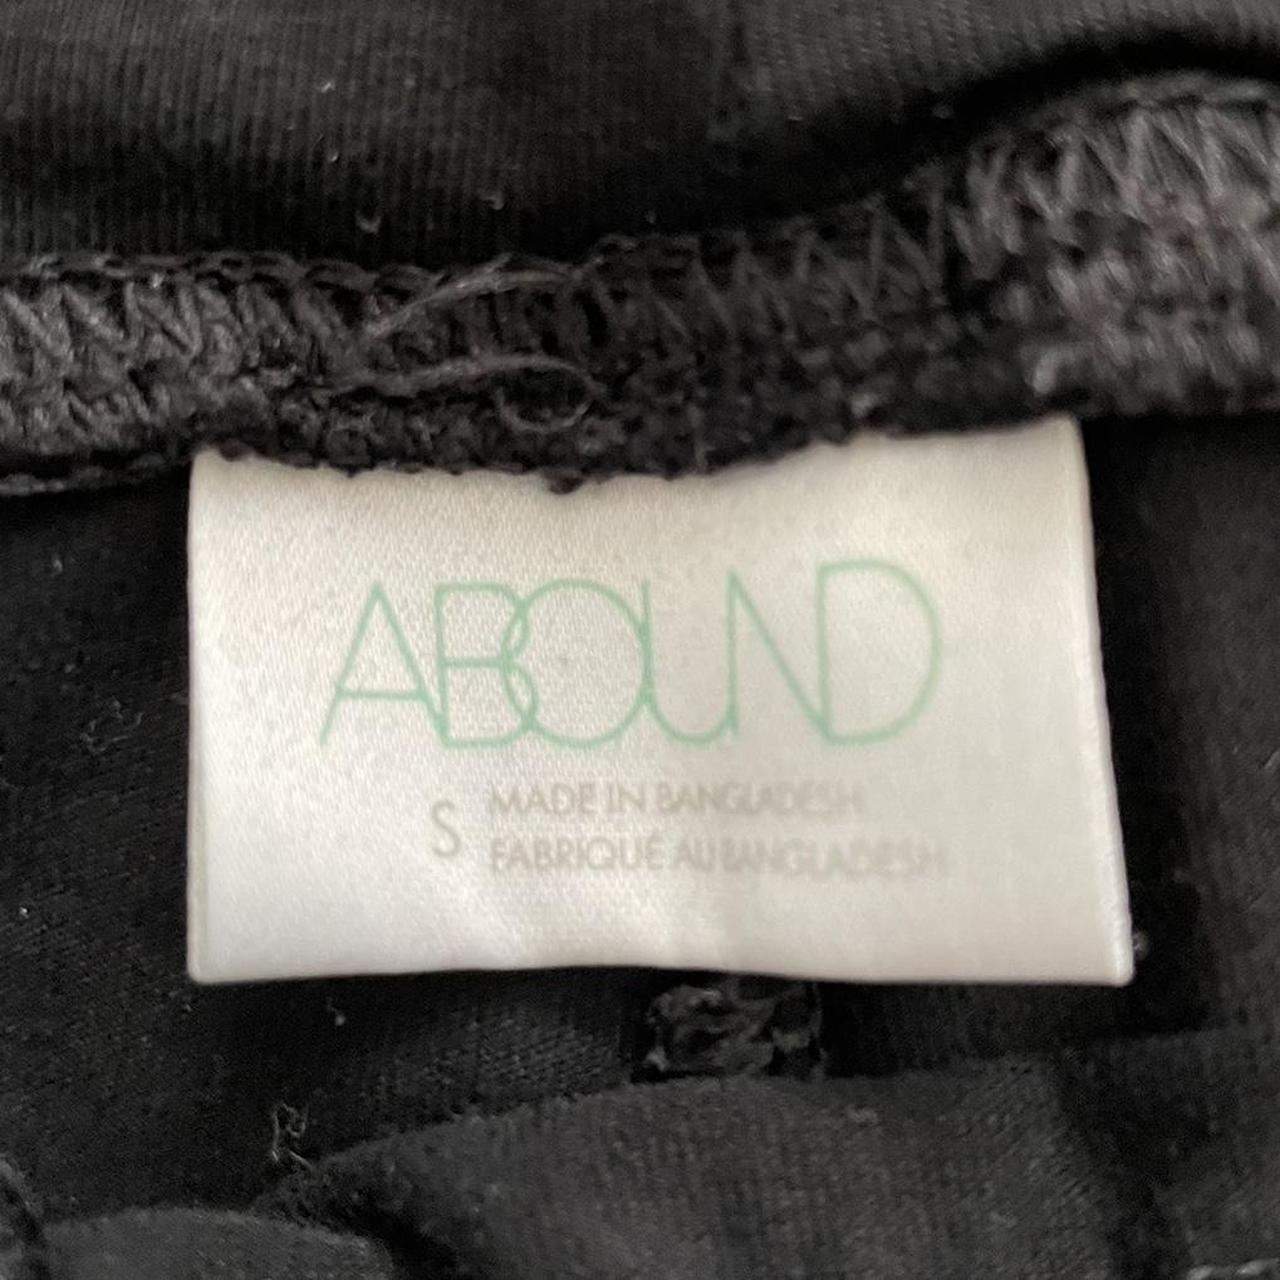 Abound leggings, Size small, Never worn before so they